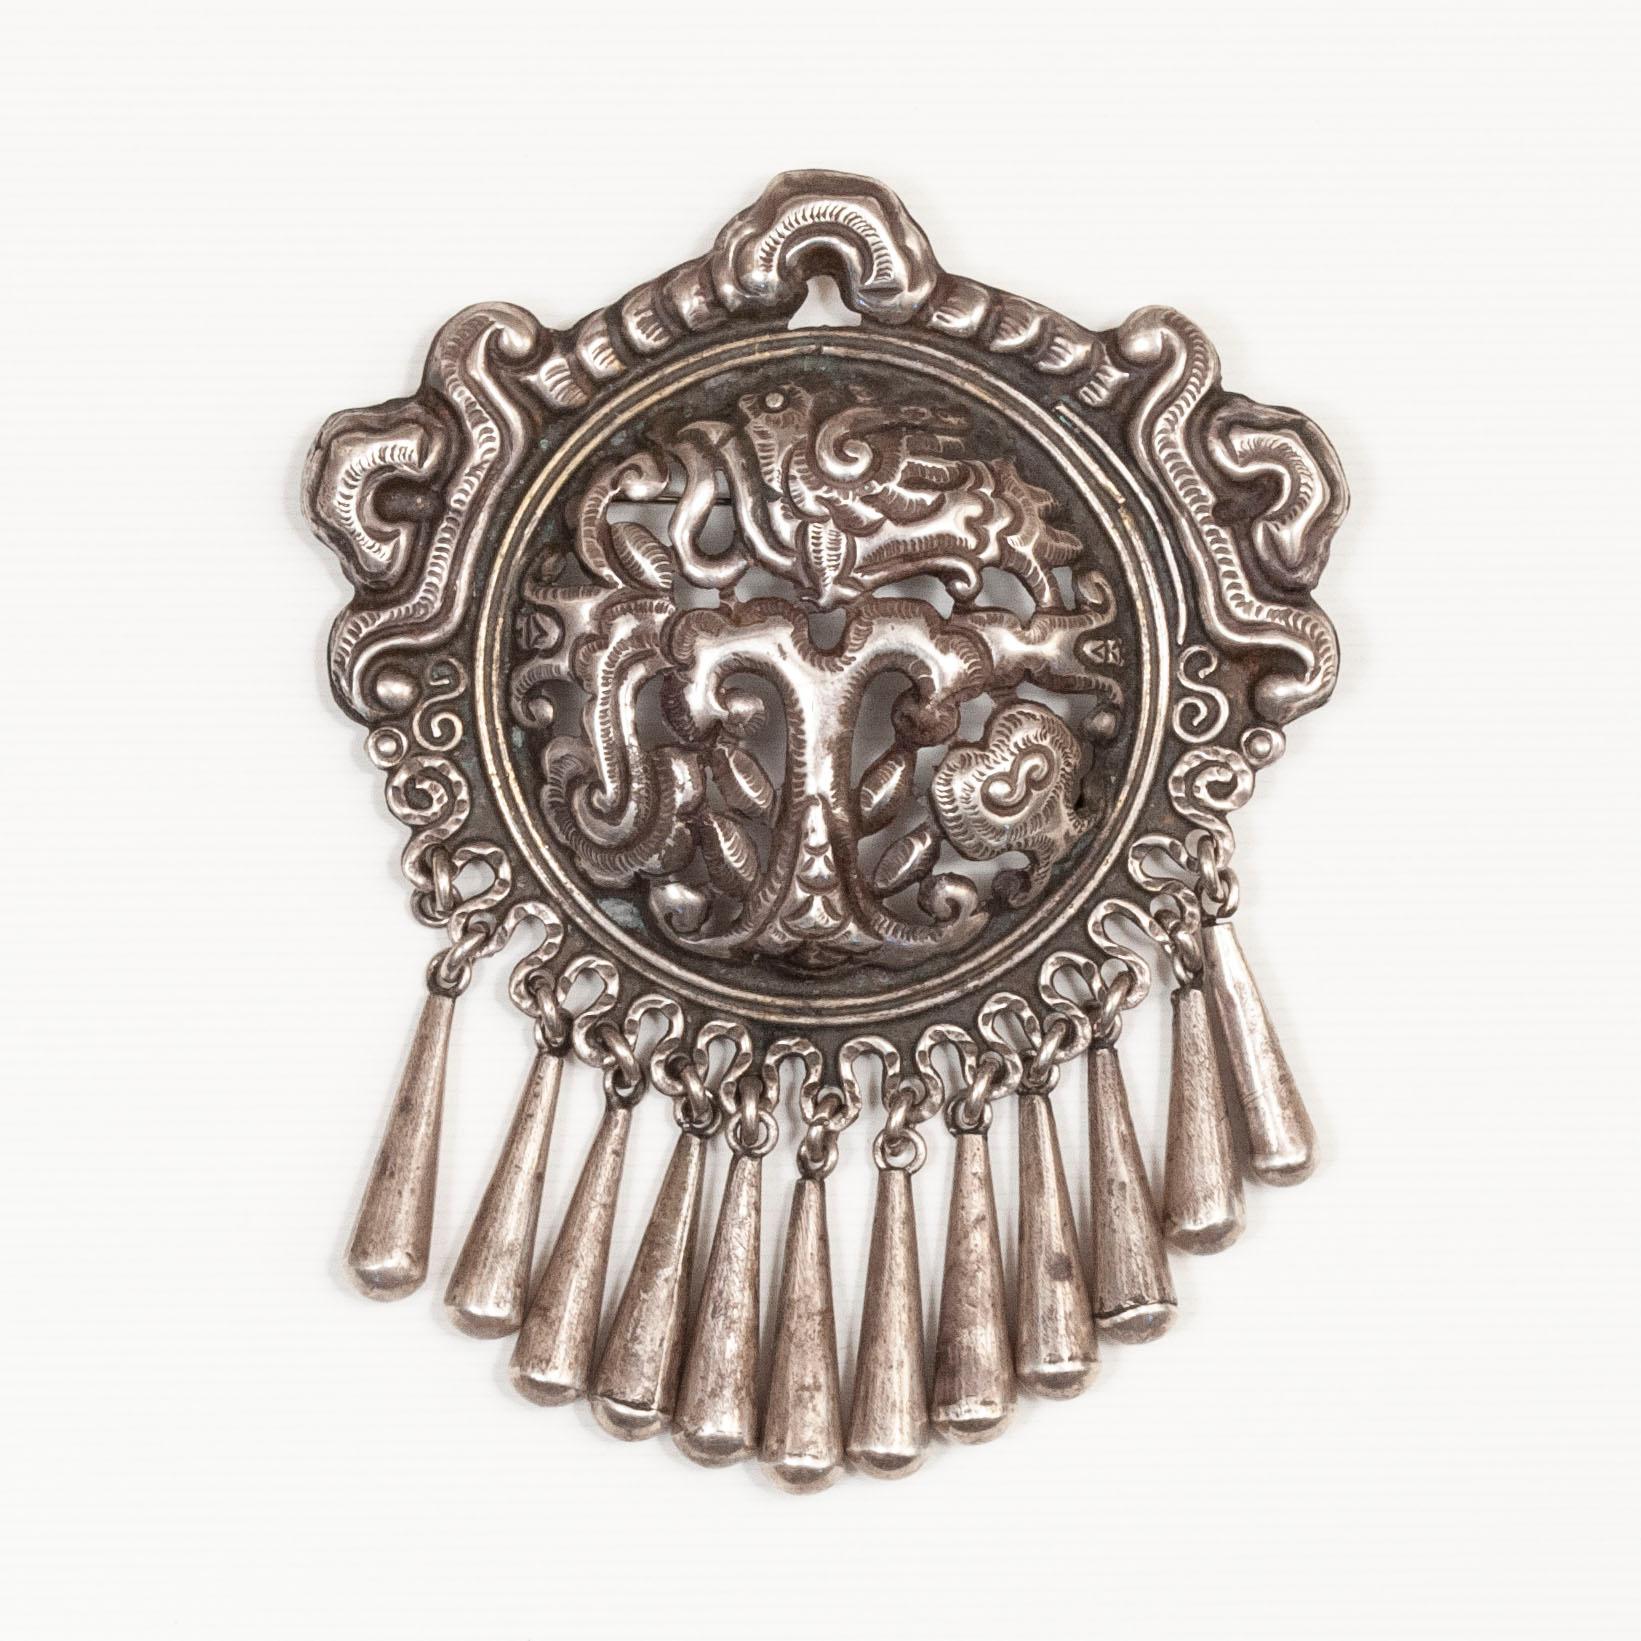 20th Century Silver Brooch by Matilde Poulat of MATL

A large silver repoussé brooch designed by Matilde Poulat and made by Ricardo Salas, her nephew. Matilde Poulat was an influential jewelry designer who opened her Mexico City workshop in the